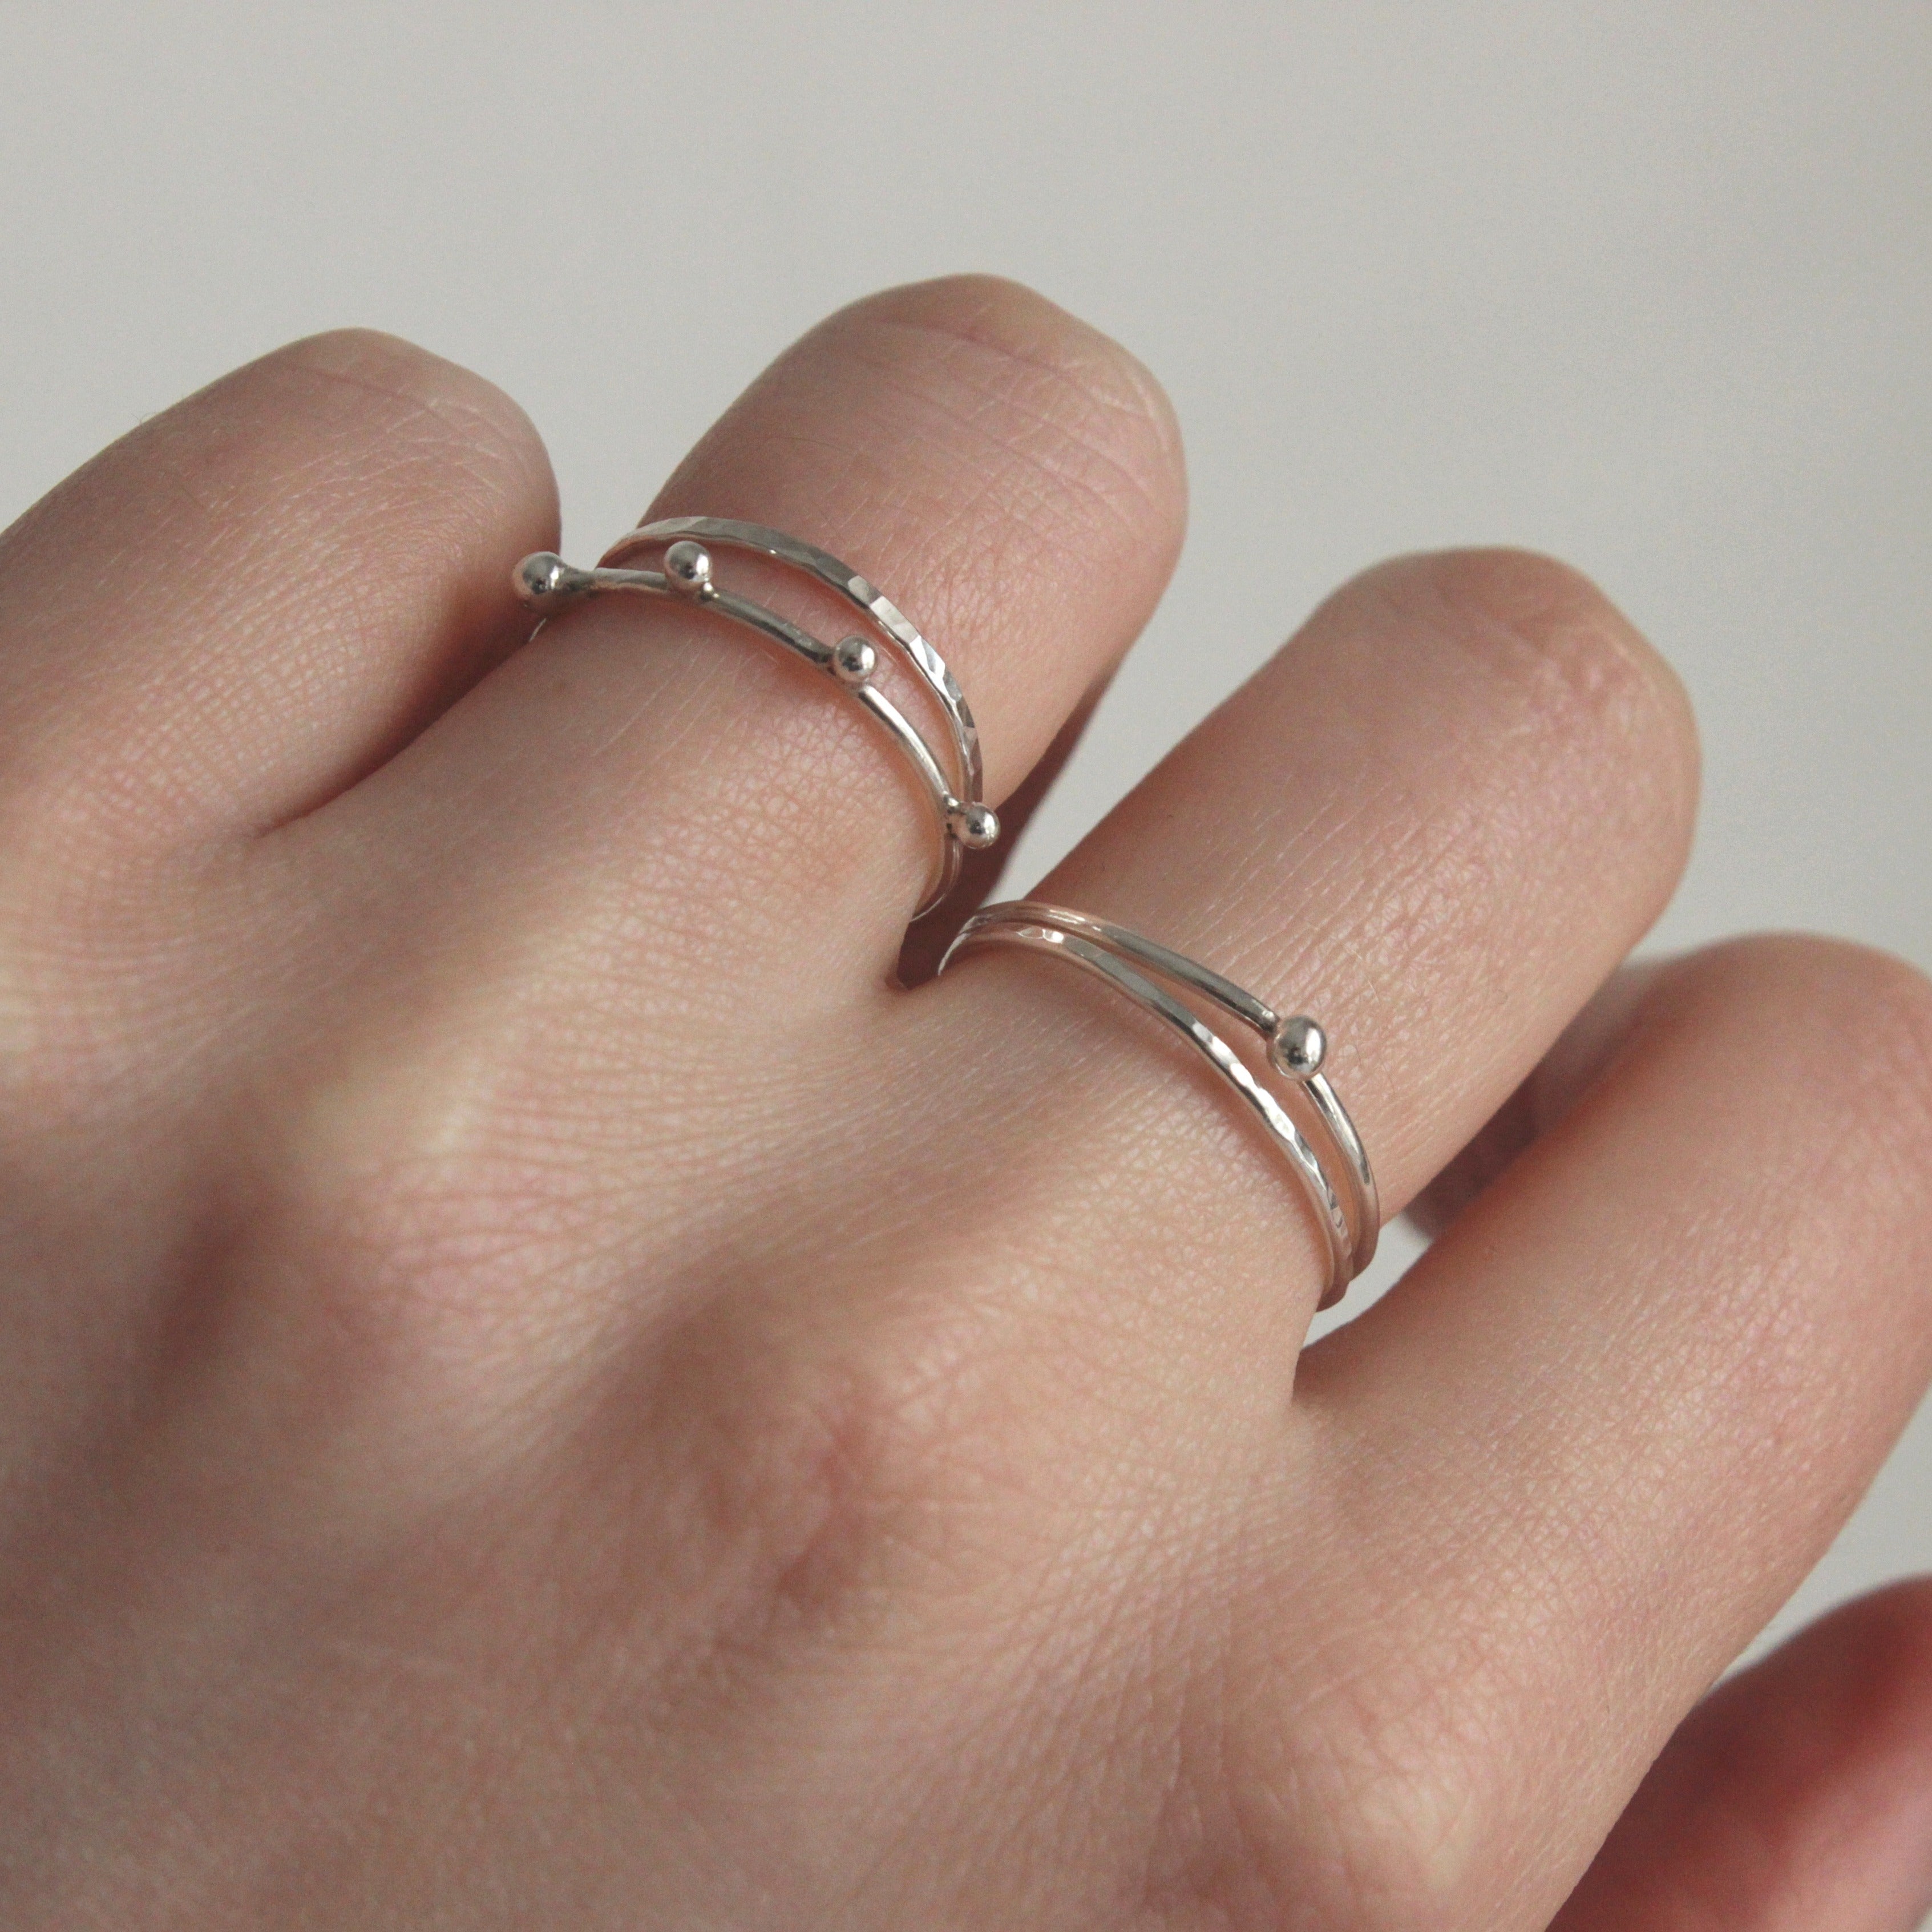 The delicate sterling silver stacking rings by Bournemouth based, Josie Mitchell Jewellery. Wear the stacker rings individually, or mix and match to create your own unique style. Hand crafted using recycled sterling silver for a timeless addition to your jewellery collection.